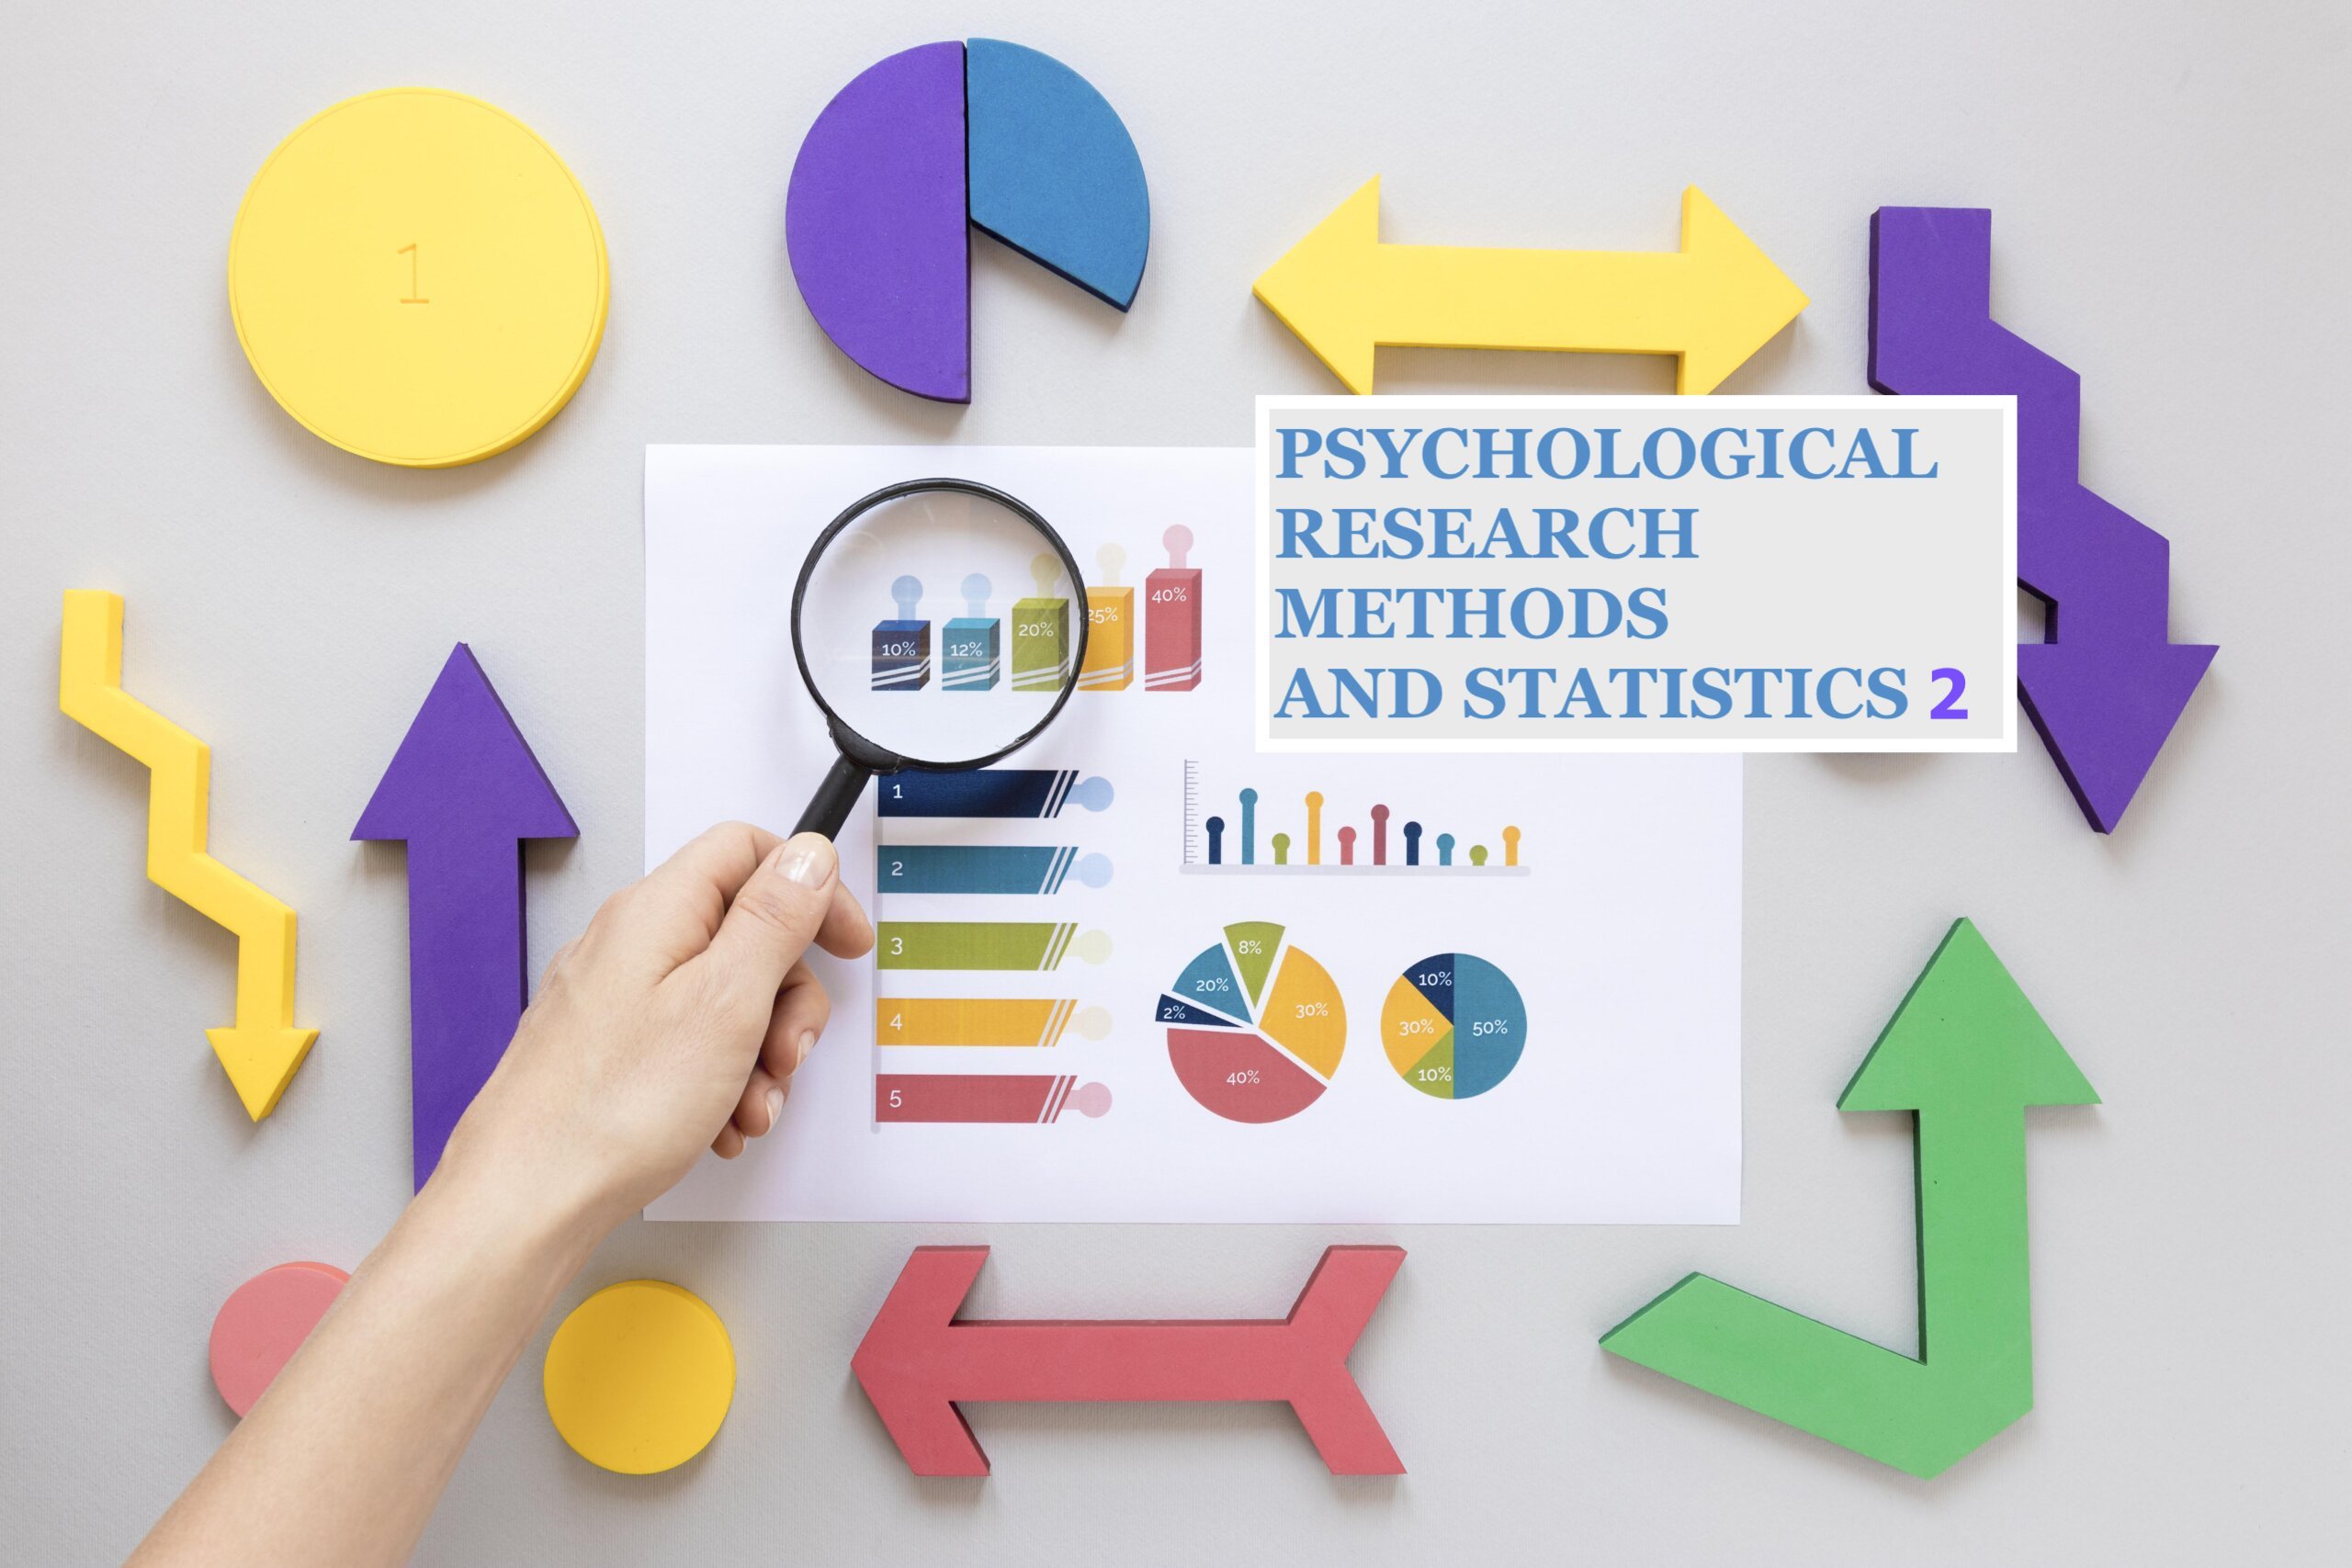 PSYCHOLOGICAL RESEARCH METHODS AND STATISTICS 2 (MCPS5022_1)